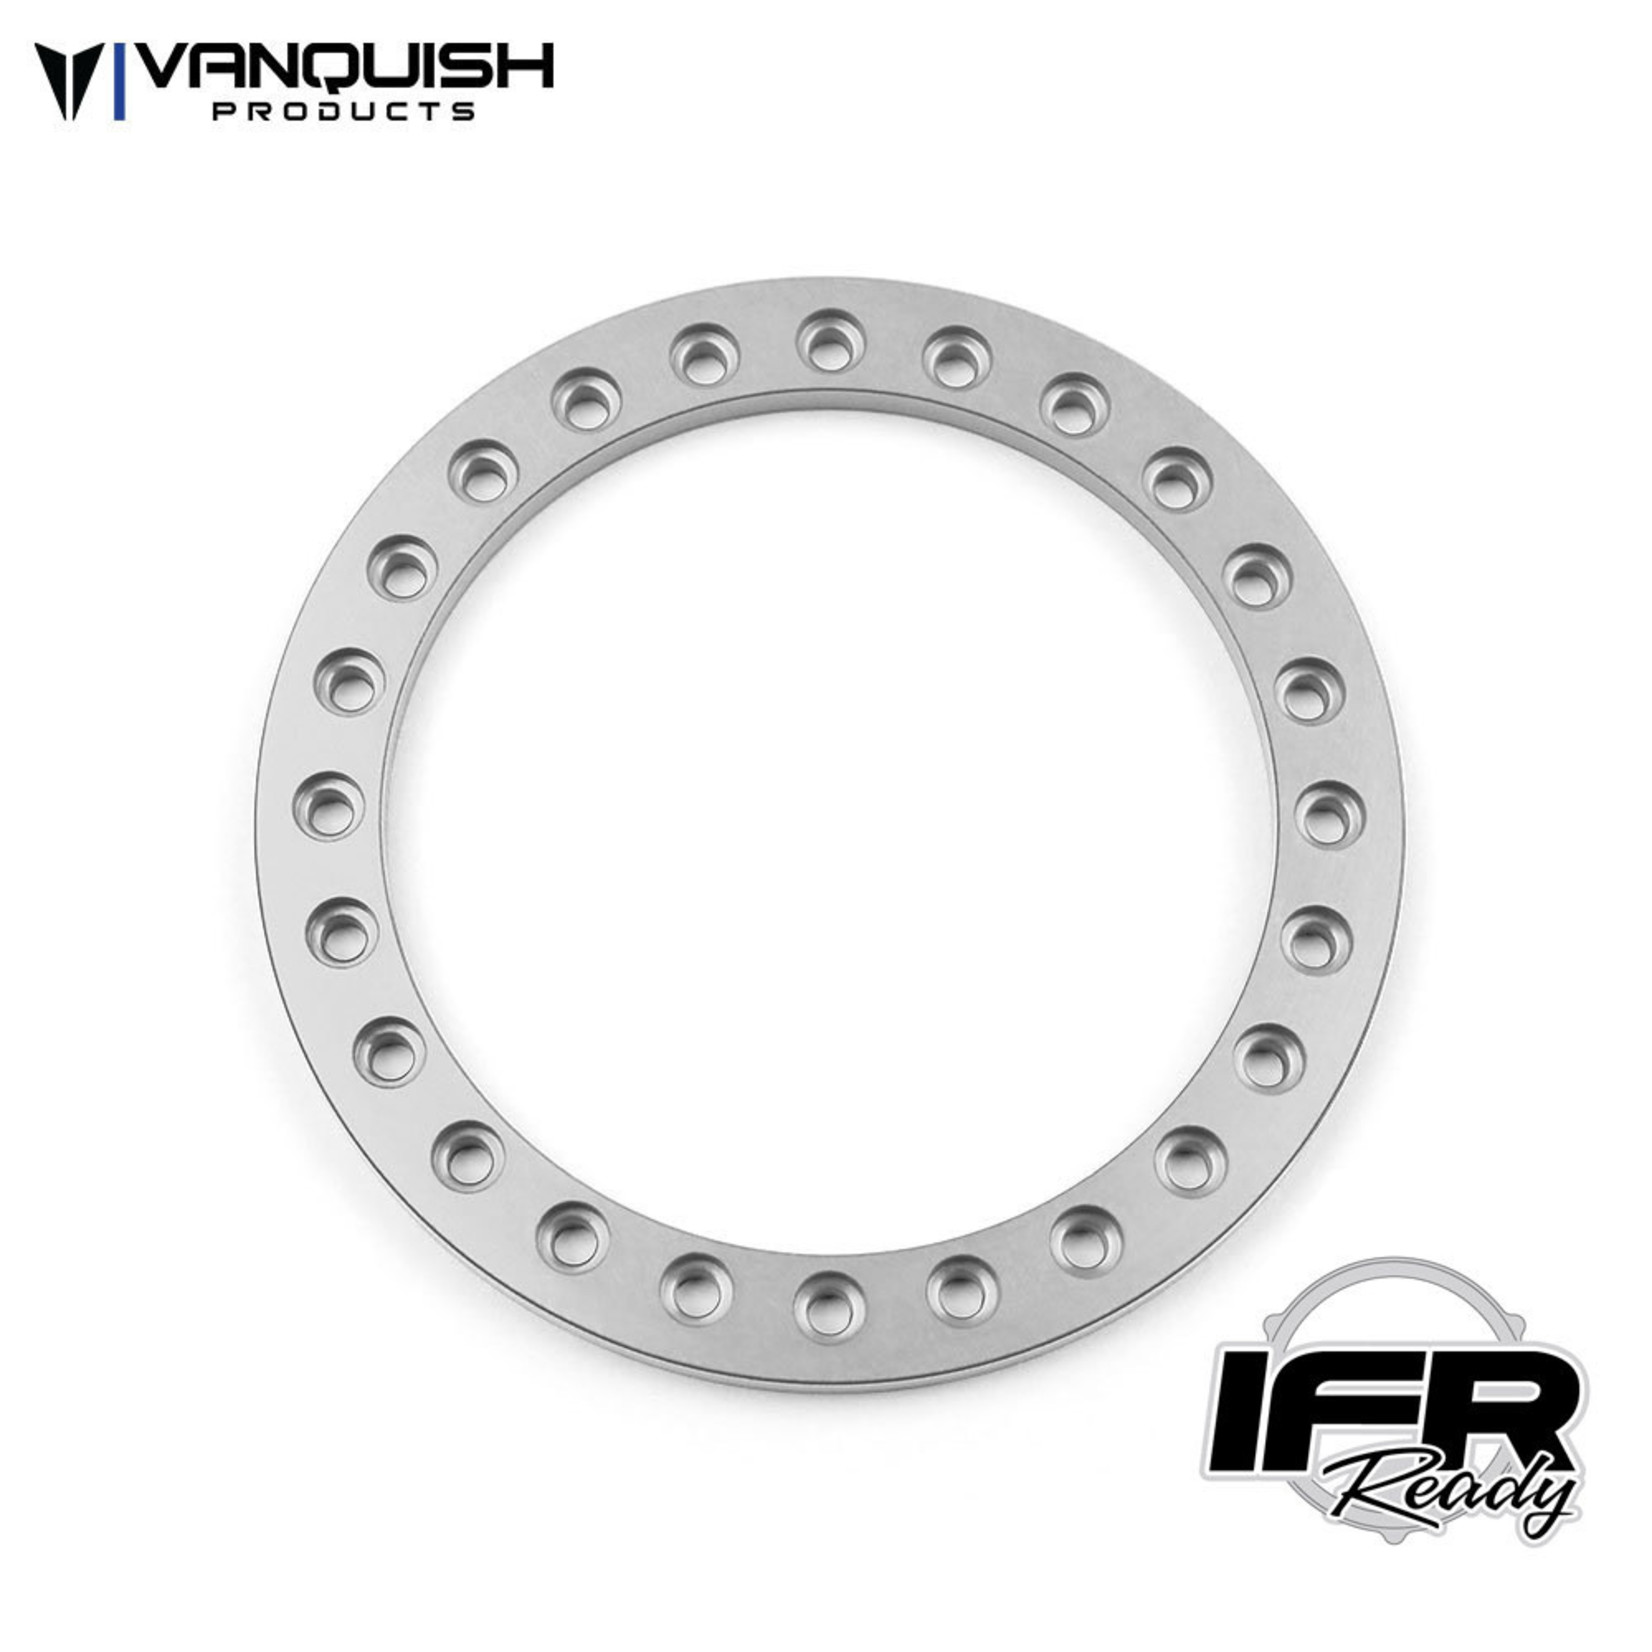 Vanquish Products 1.9 IFR Original Beadlock Ring Clear Anodized